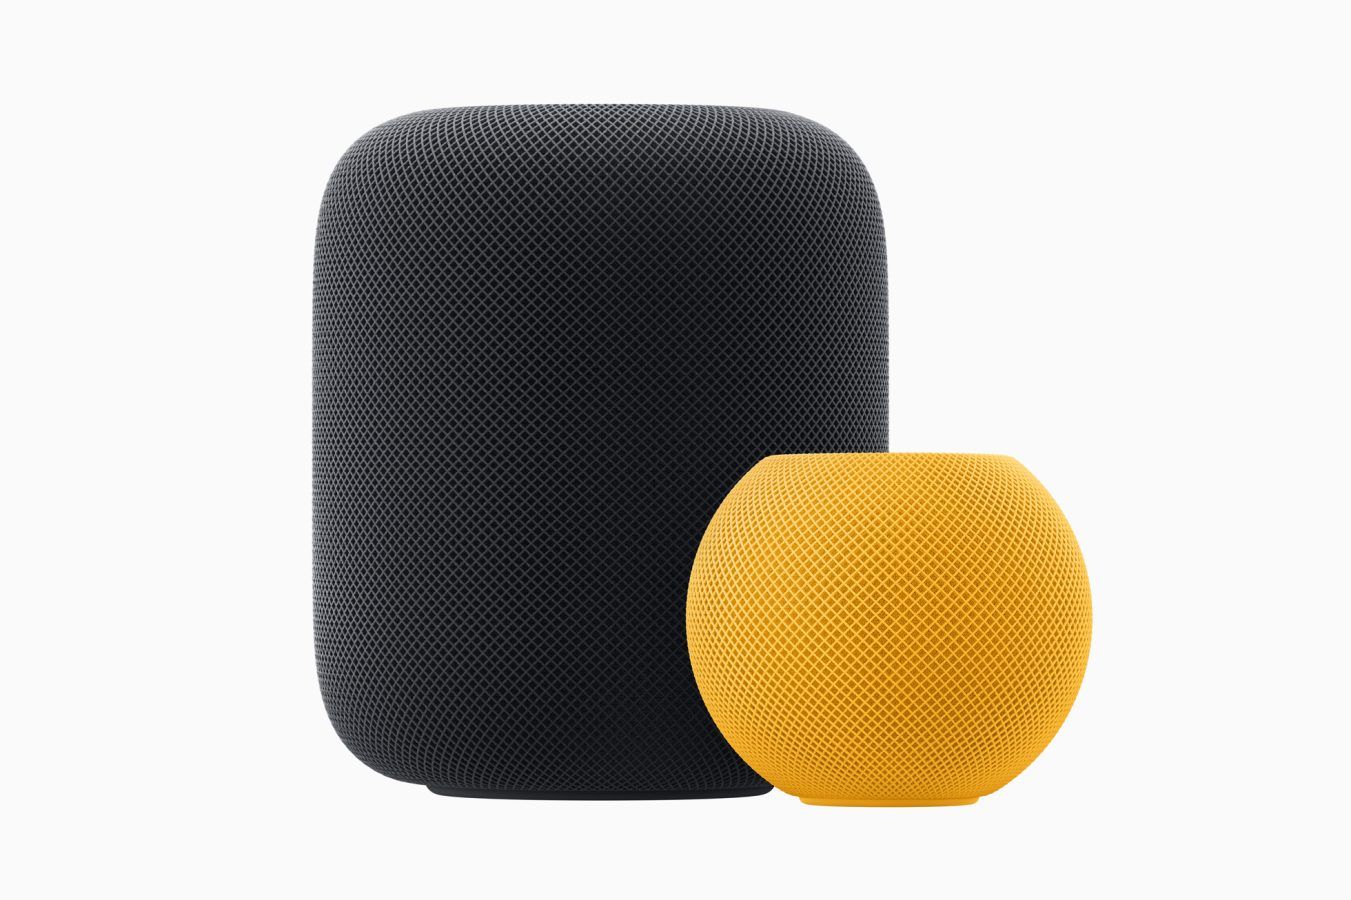 Review: Are the mini and worth Apple HomePod it? HomePod